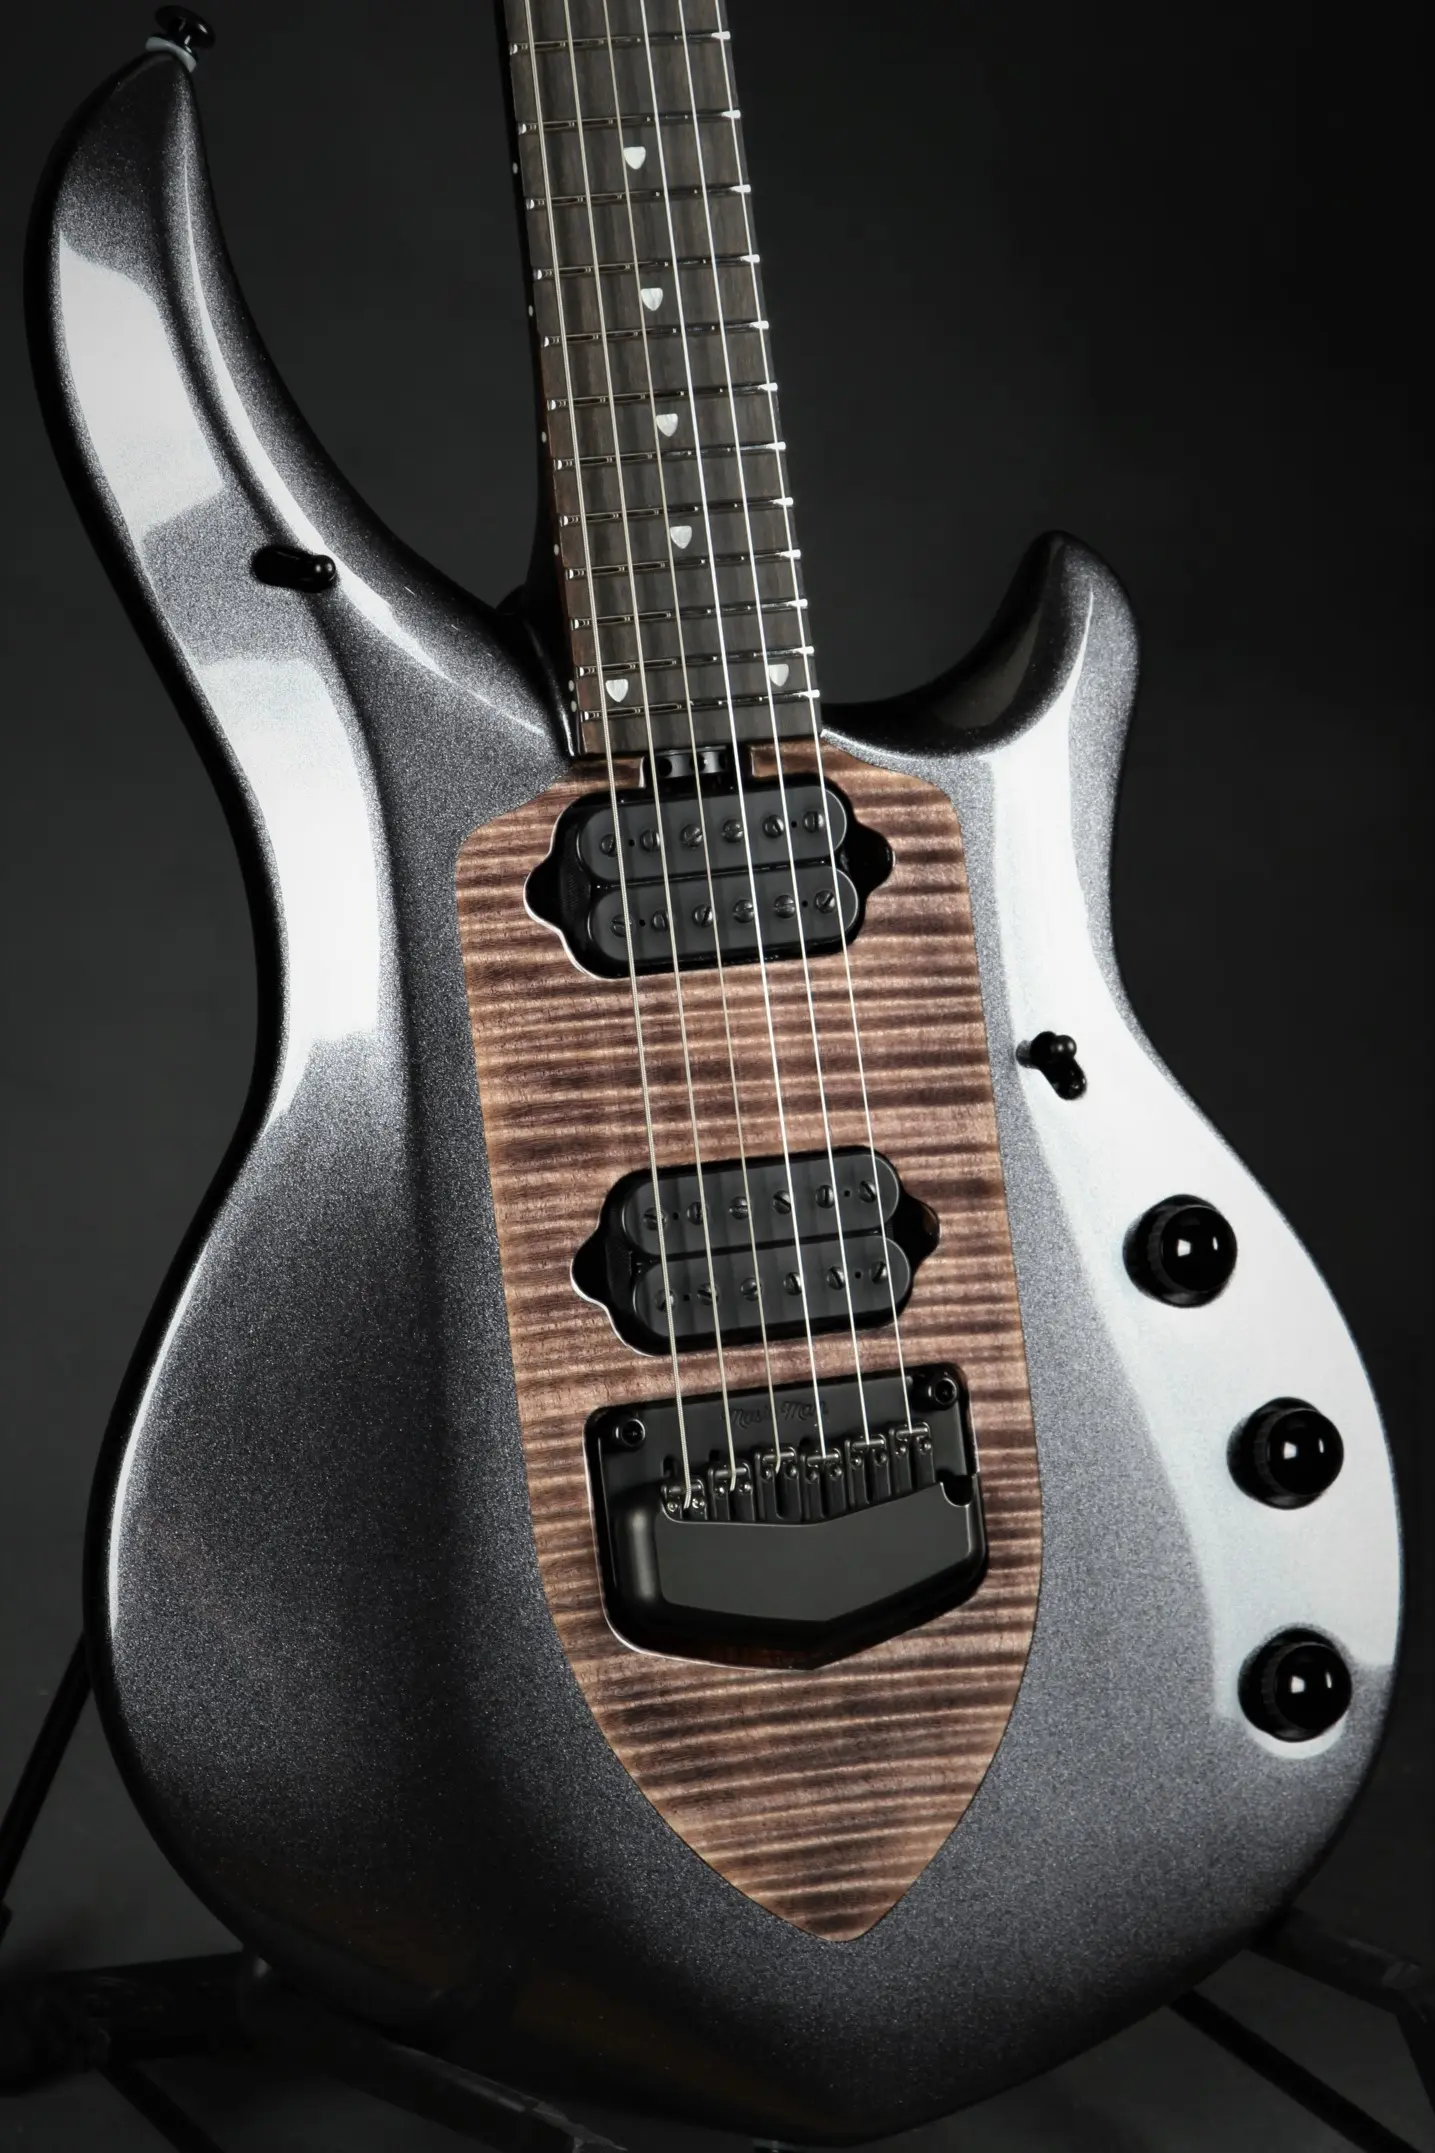 majesty smoked pearl - What is the price of majesty guitar in India